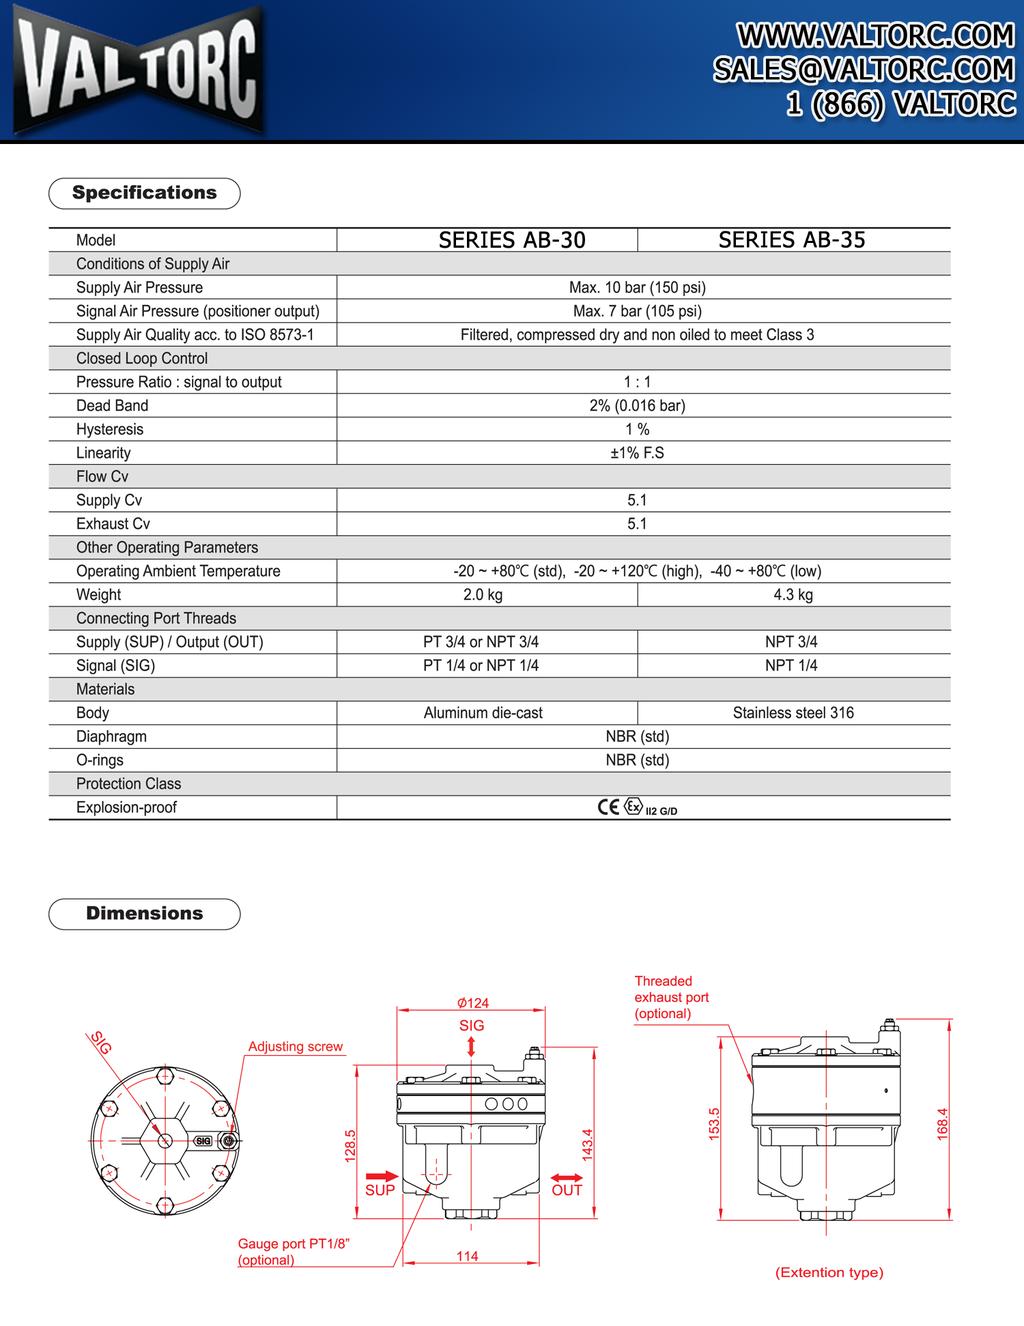 ( Specifications ) Model Conditions of Supply Air Supply Air Pressure Signal Air Pressure (positioner output) Supply Air Quality ace.